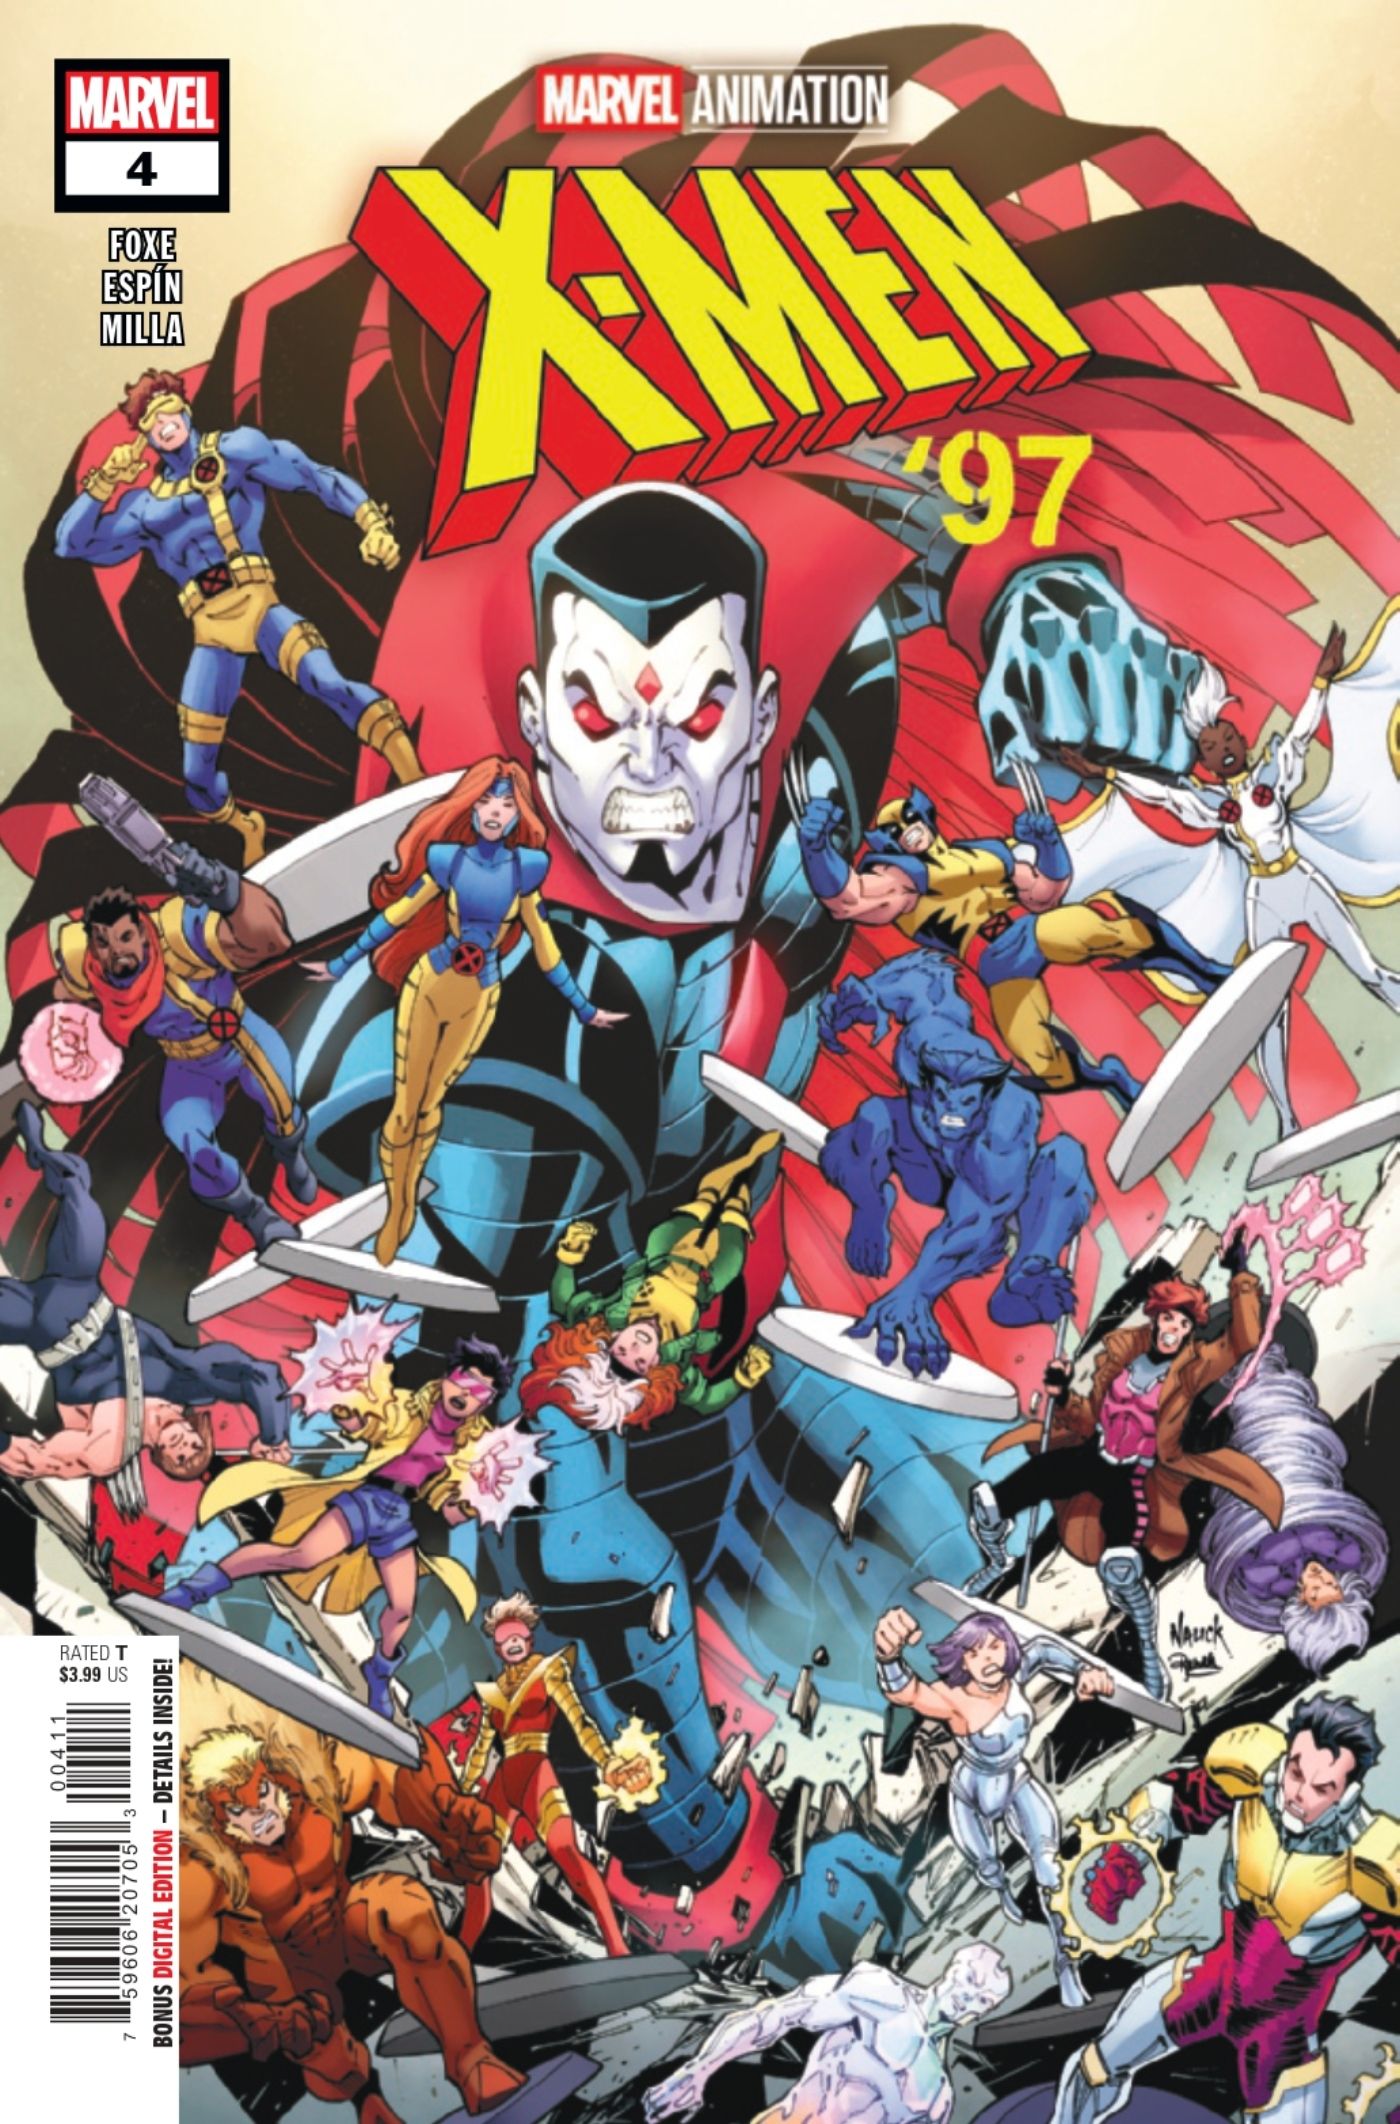 X-Men '97 #4 cover featuring the X-Men with Mr. Sinister looming above them.